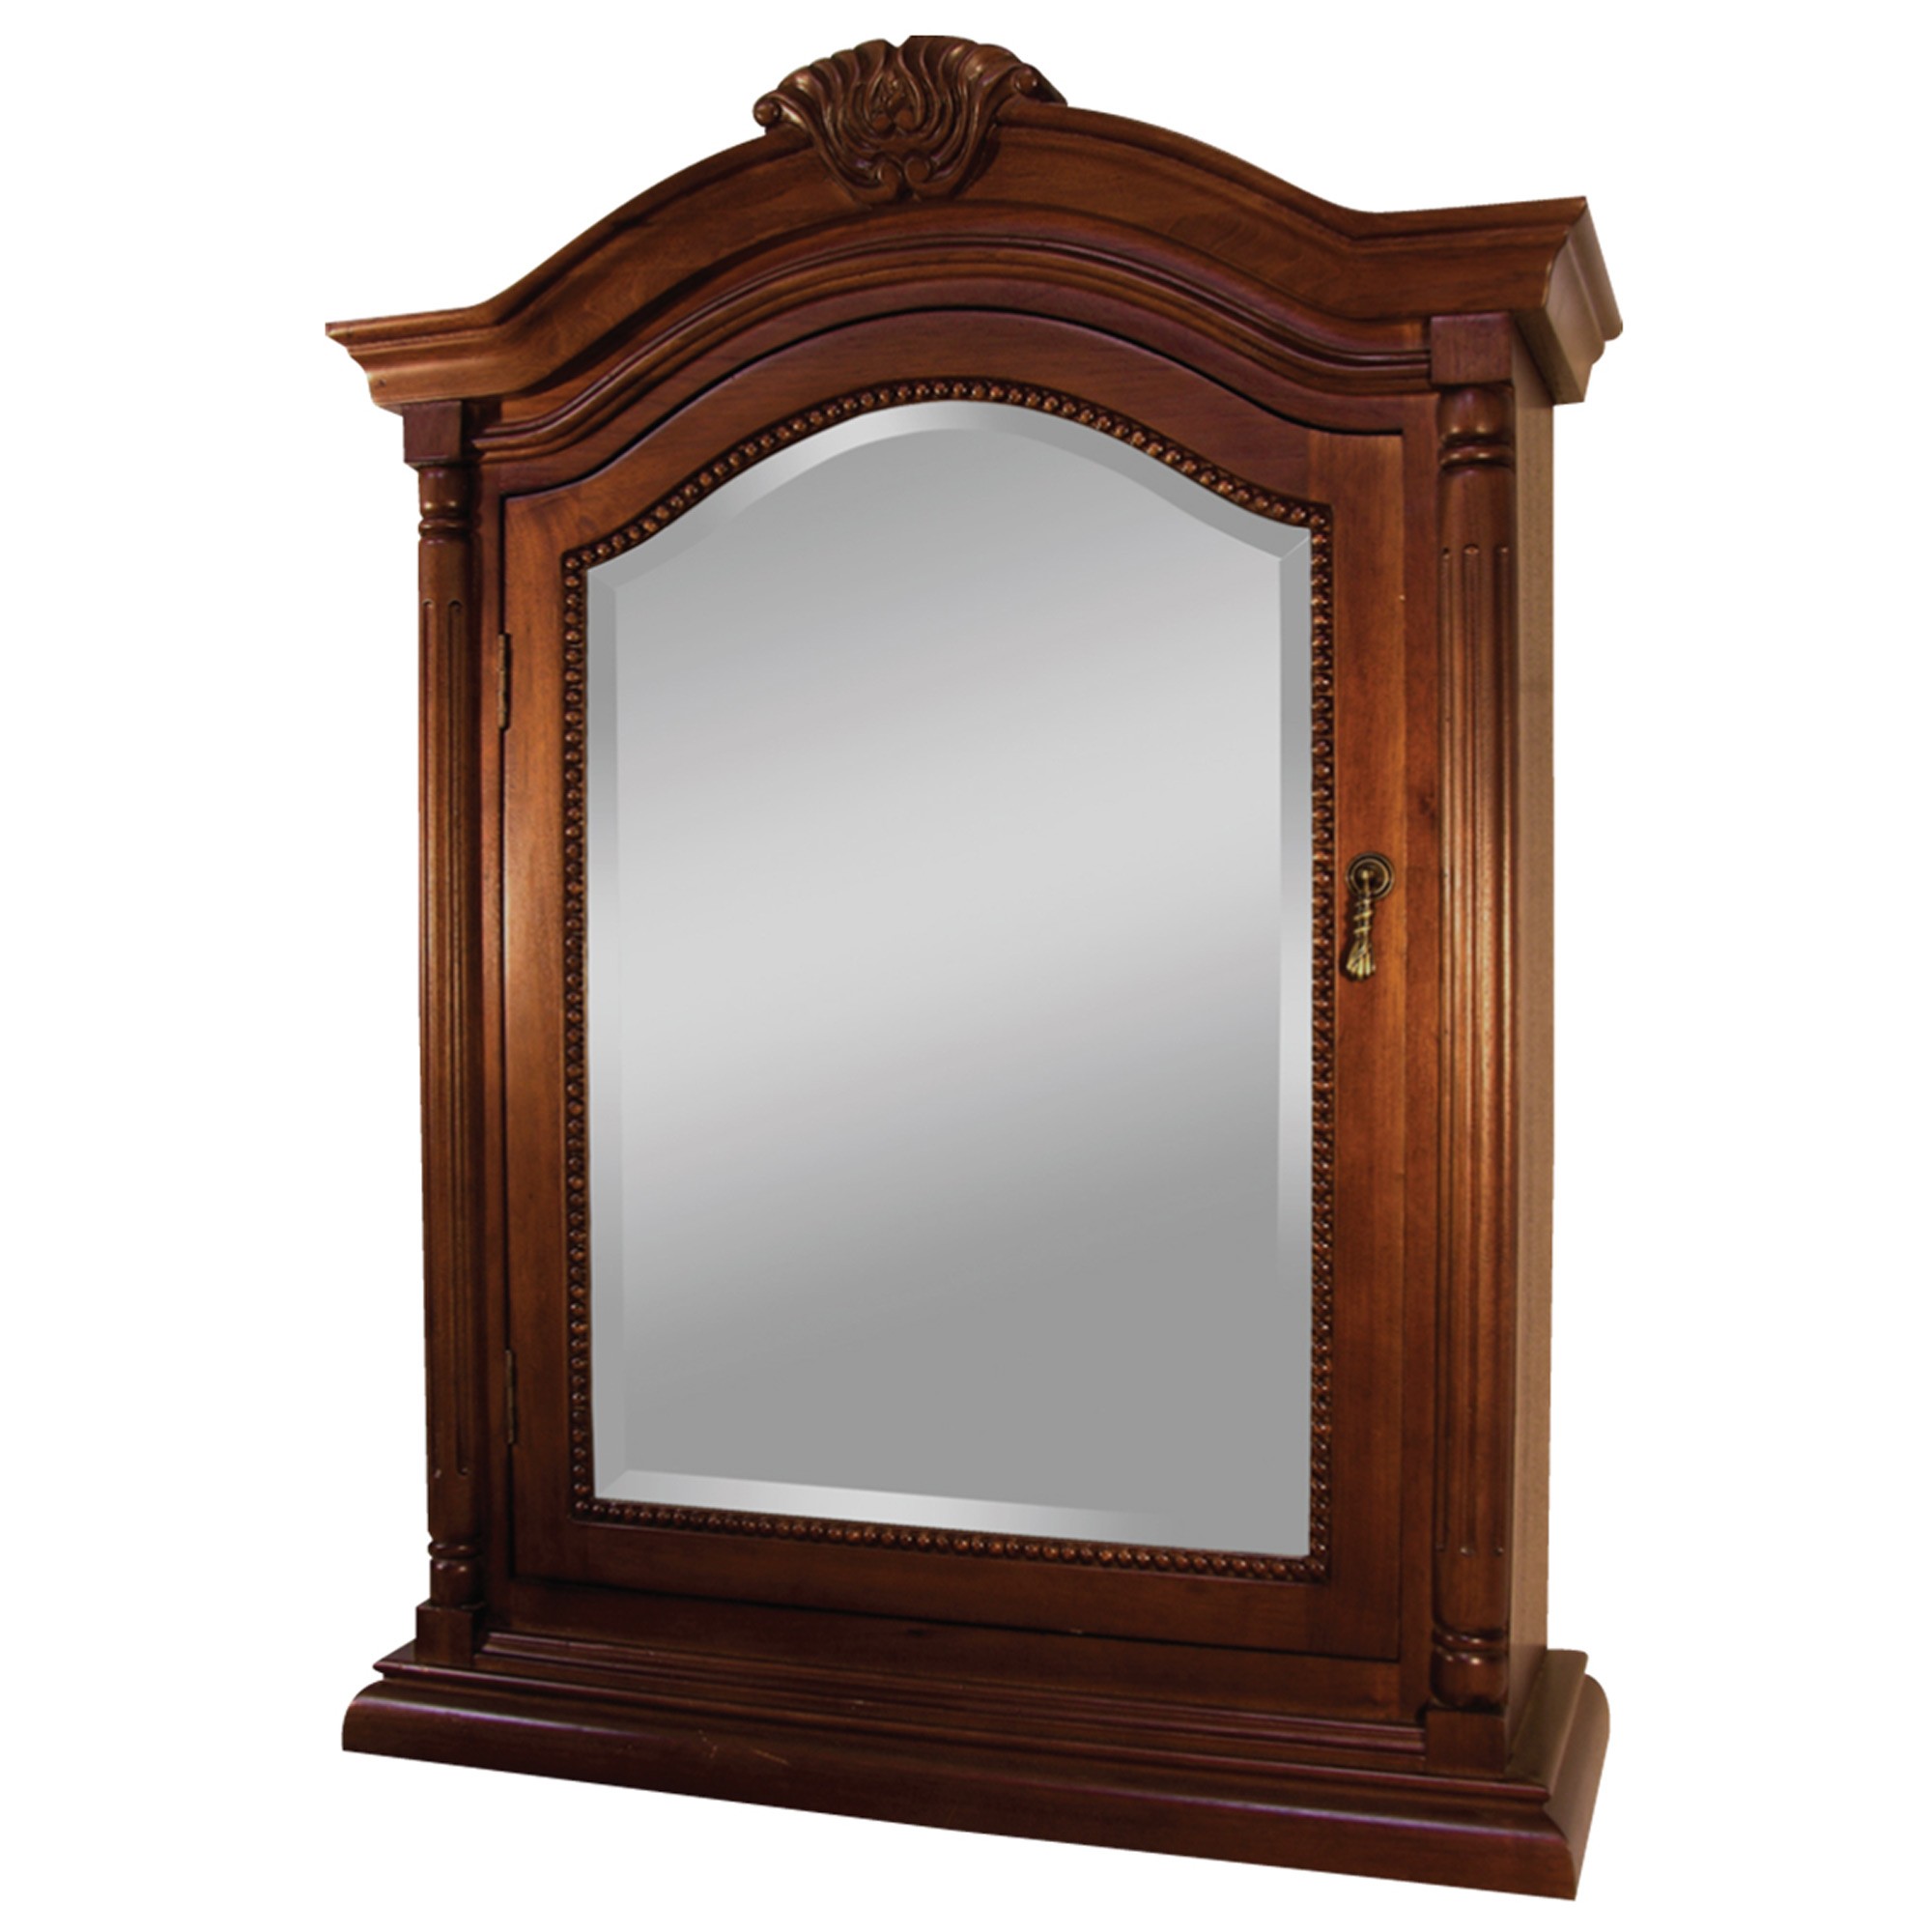 Cherry finish wood surface wall mount mirror medicine toiletry cabinet